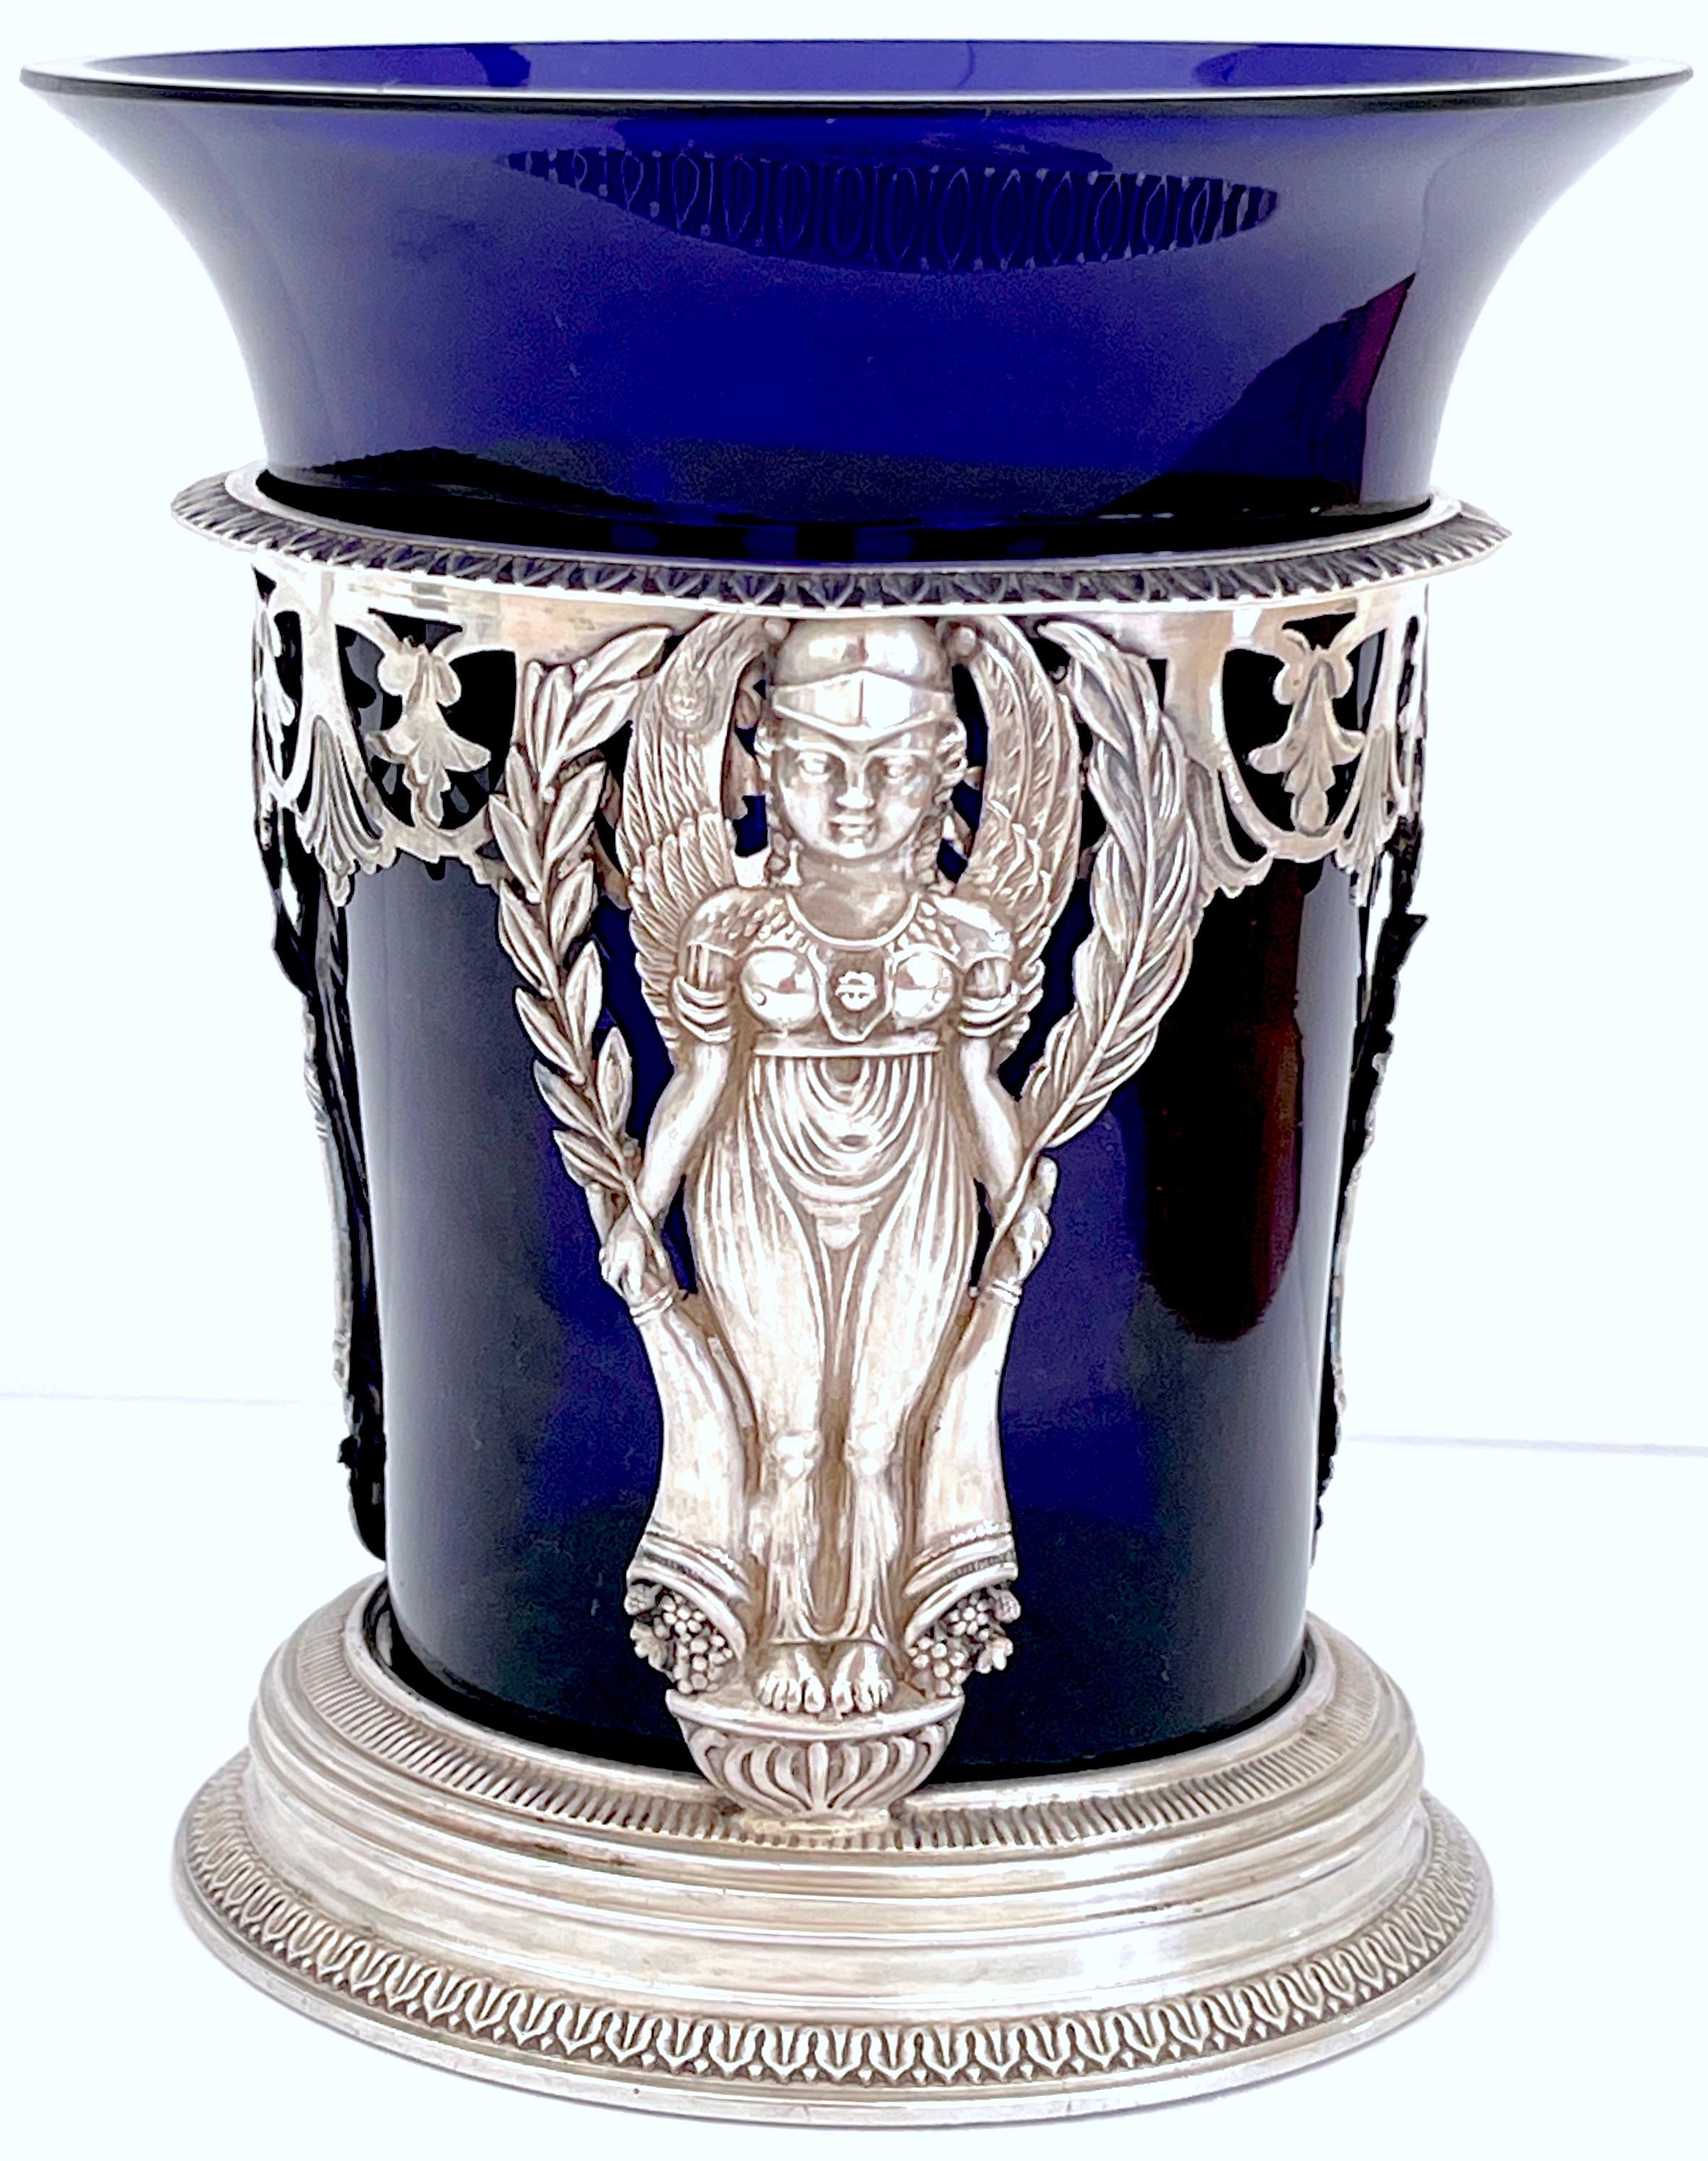 18th Century Silver & Cobalt Glass Vase, French 1st Republic, Paris 1798 
Hallmarked, The removable cobalt glass liner is antique, probably the orignal. 

A  distinguished 18th Century Silver & Cobalt Glass Vase, made during the French 1st Republic,